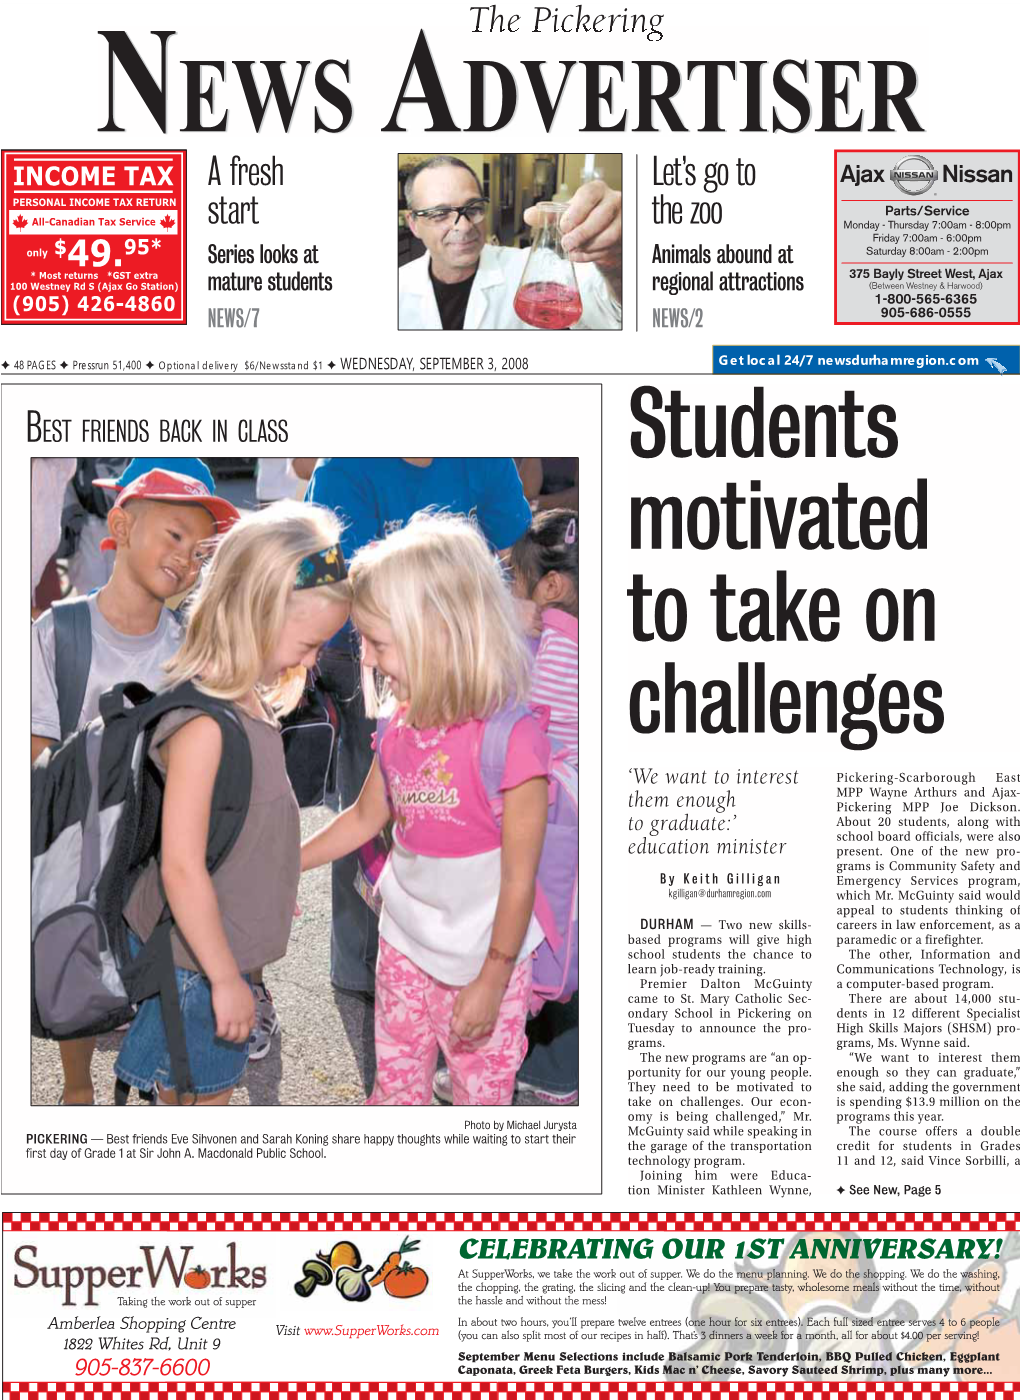 Students Motivated to Take on Challenges